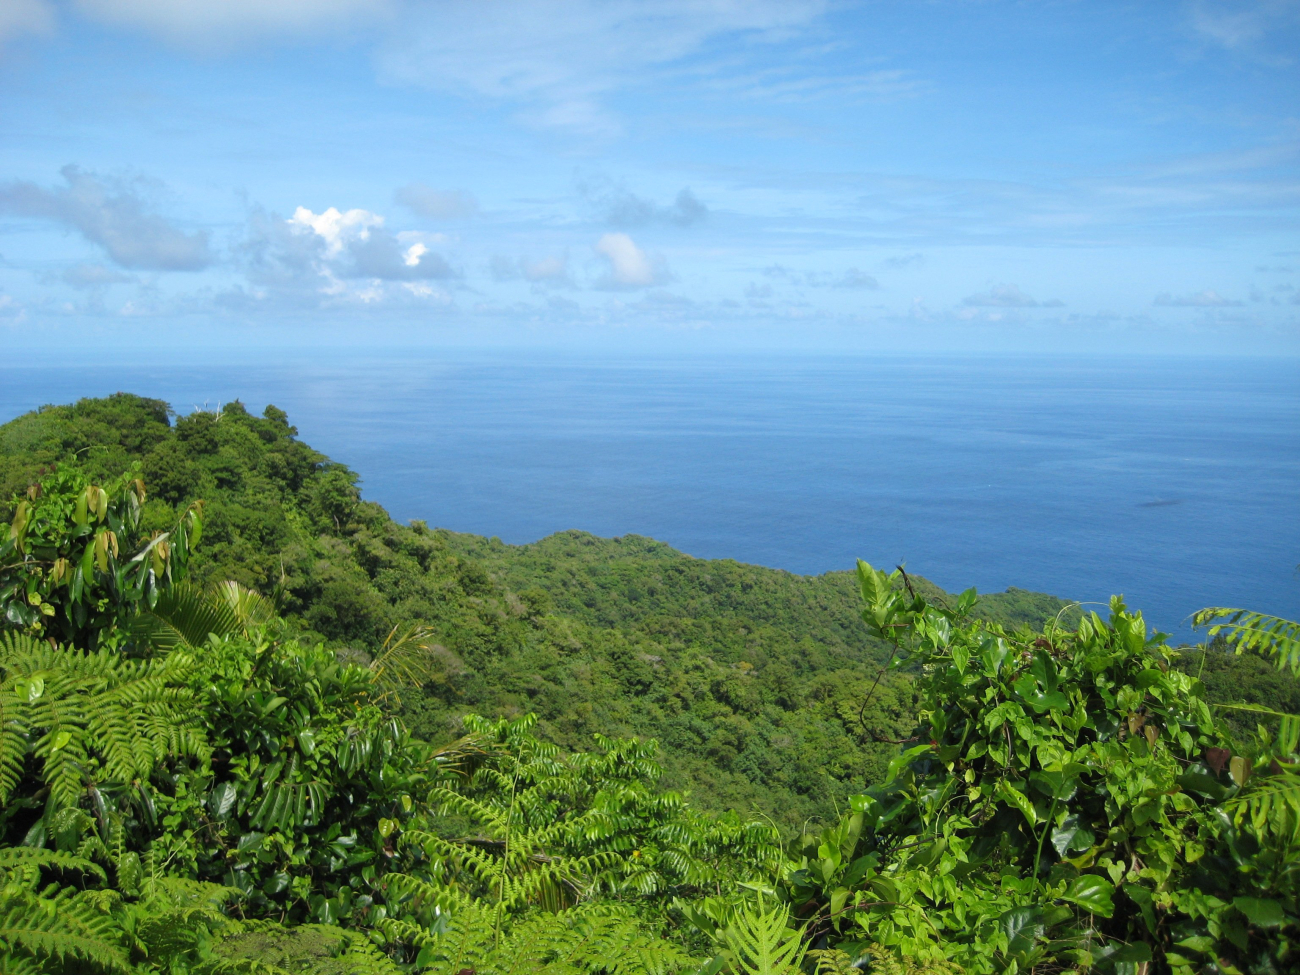 A view over the lush Samoan vegetation to the Pacific Ocean